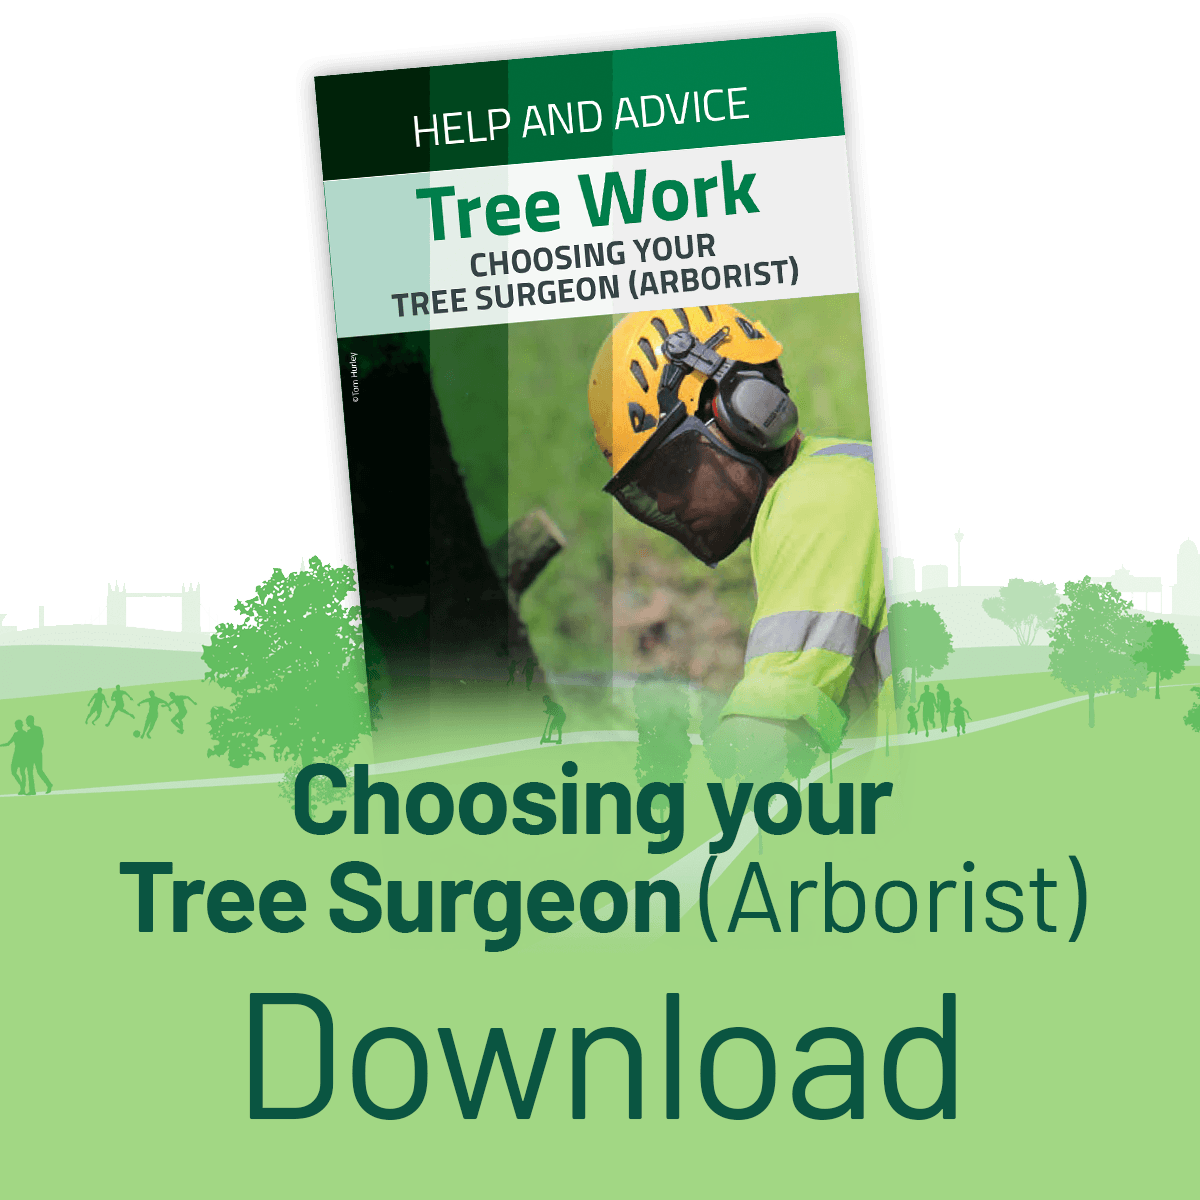 Download the Choosing Your Arborist Leaflet